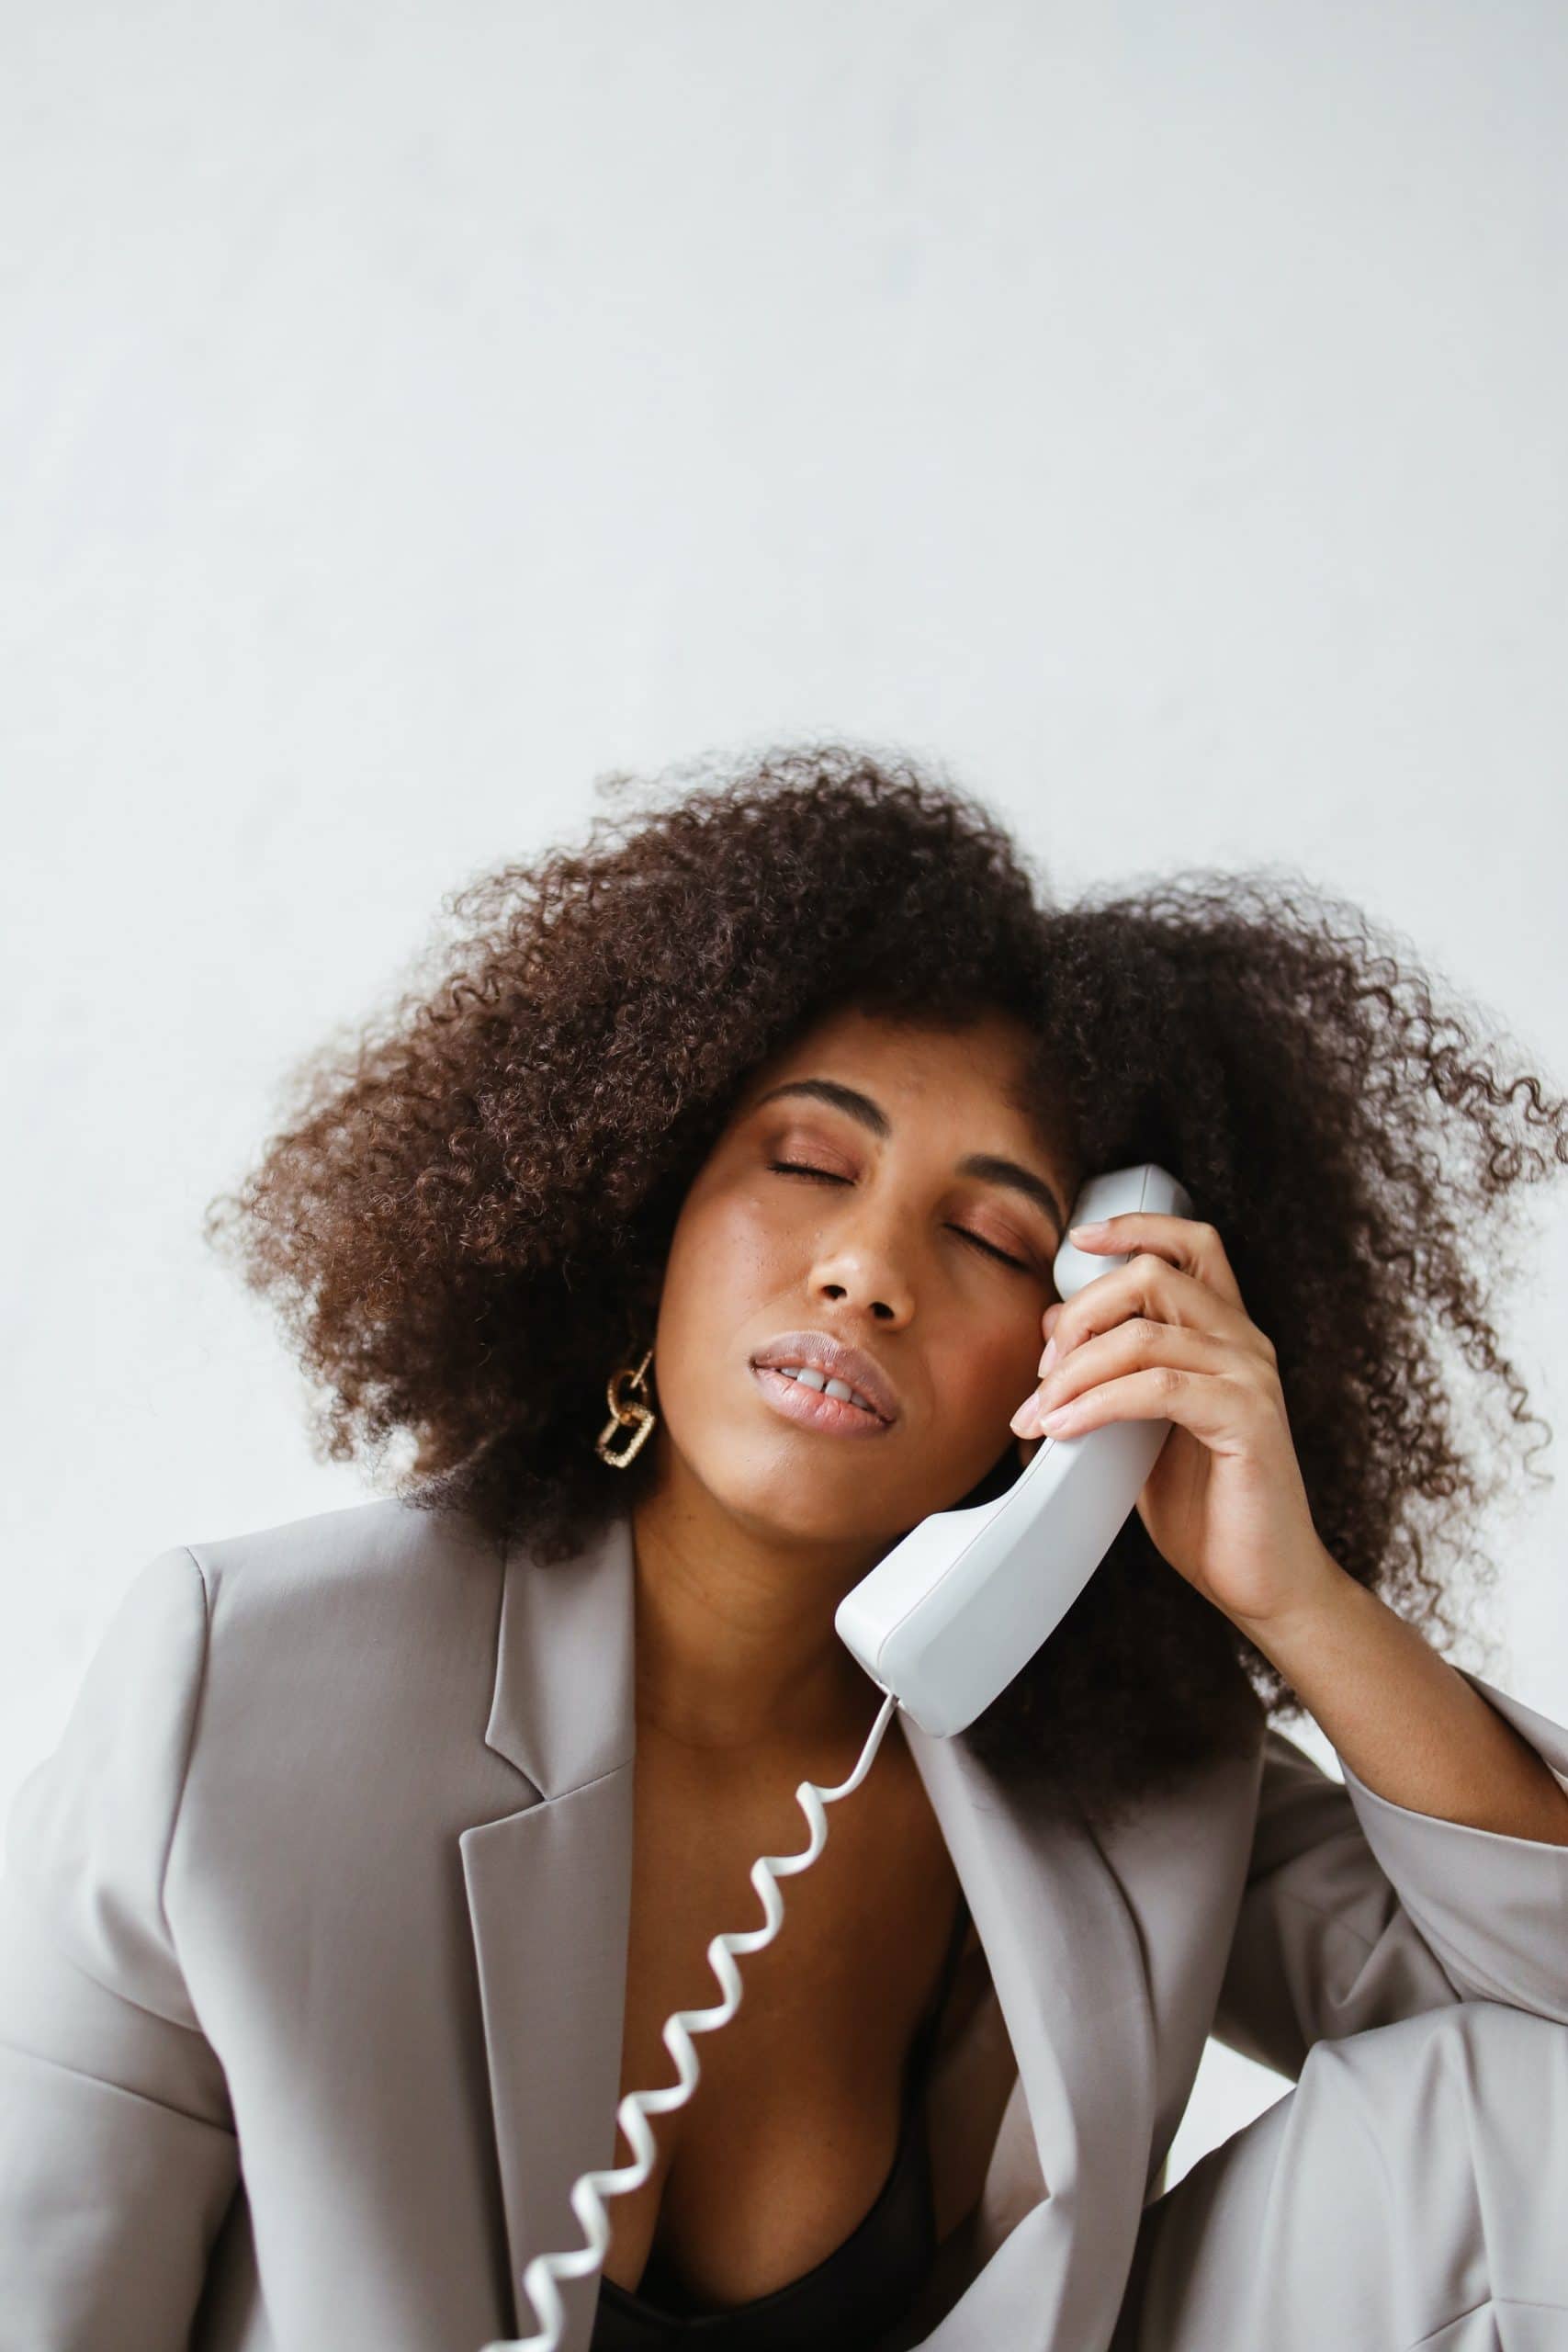 Black Millennial professional woman with natural hair in a gray pantsuit, holding a phone receiver. Her eyes area closed and her expression is stressed, exhausted, and burned out.